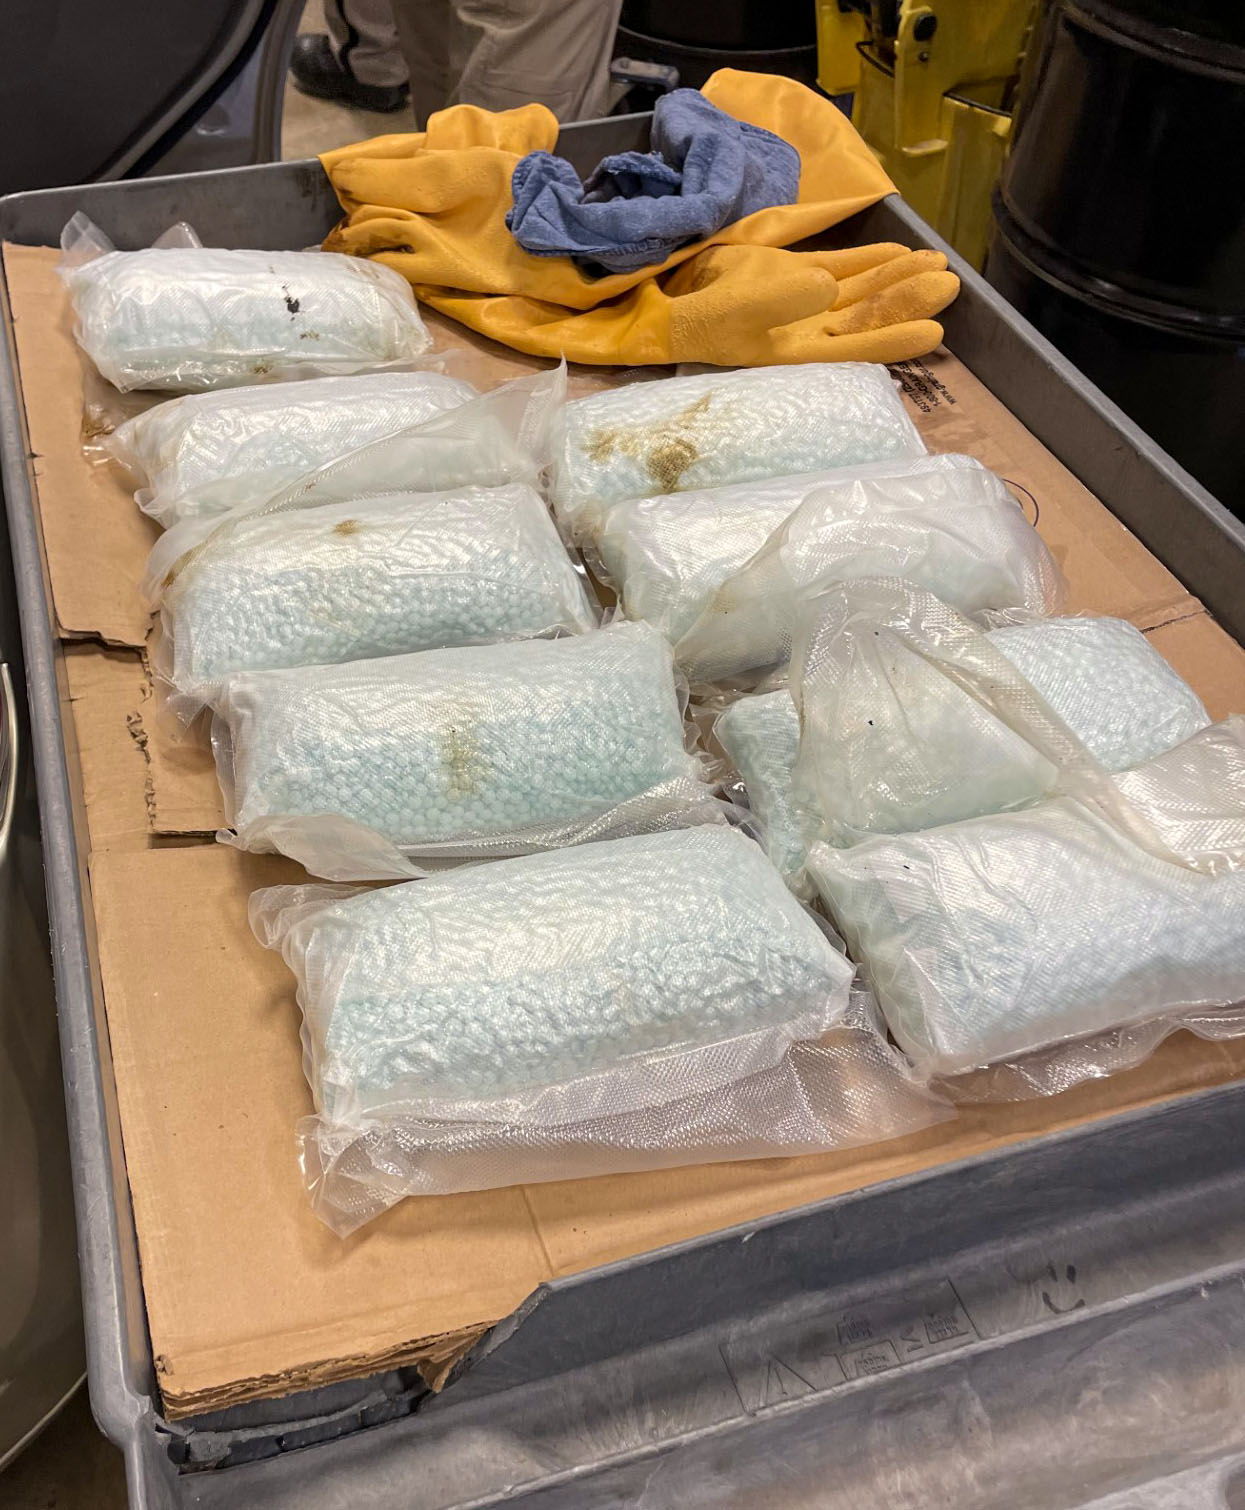 Arizona State Troopers Seize More Than 1,500 Pounds of Fentanyl in Six-Month Period